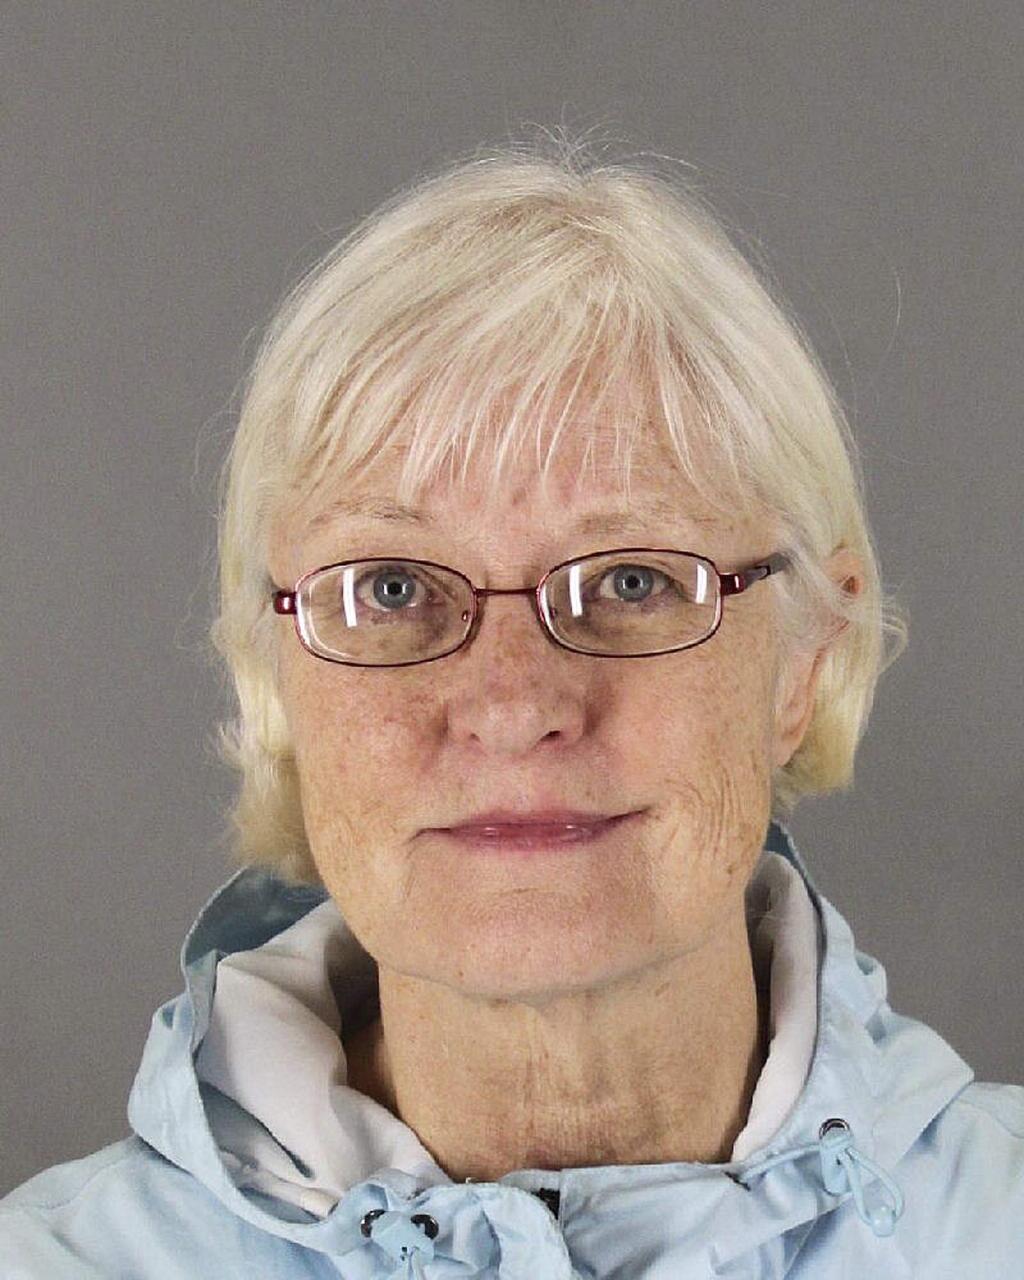 This March, 2014 photo released by the San Mateo County Sheriff's Office shows Marilyn Hartman. Federal law enforcement officials say Hartman tried at least three times to breach airport security before she was able to get through a checkpoint without a boarding pass at Mineta San Jose International Airport on Monday, Aug. 4, 2014. (AP Photo/San Mateo County Sheriff's Office)